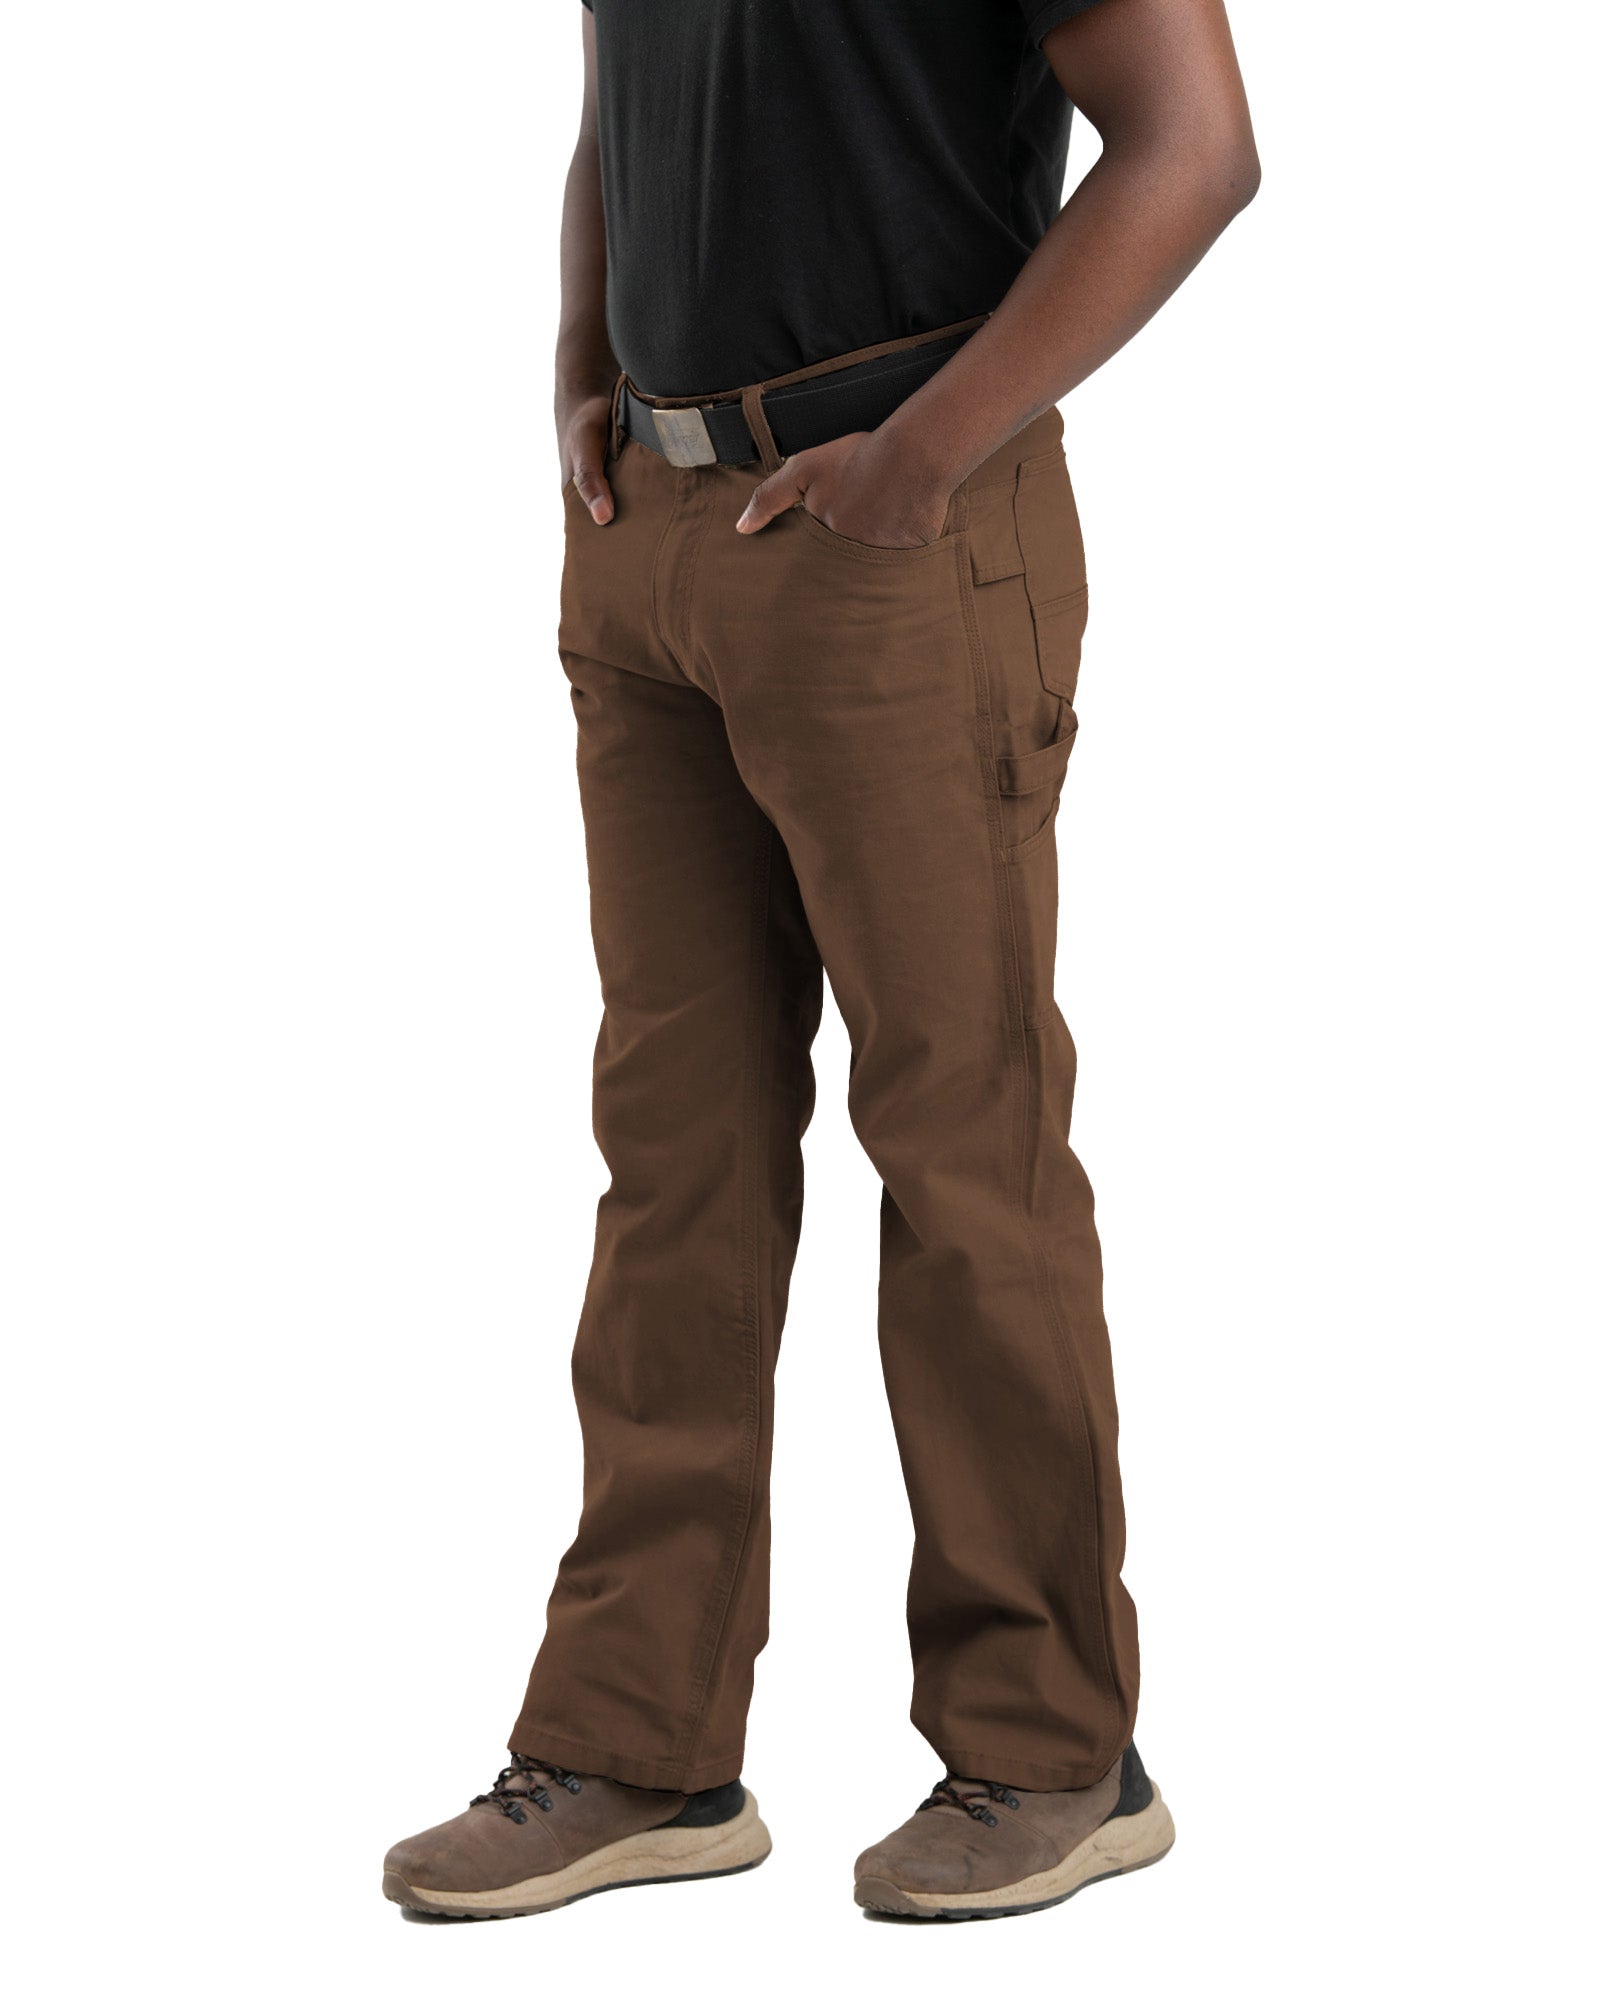 Heartland Washed Duck Relaxed Fit Carpenter Pant